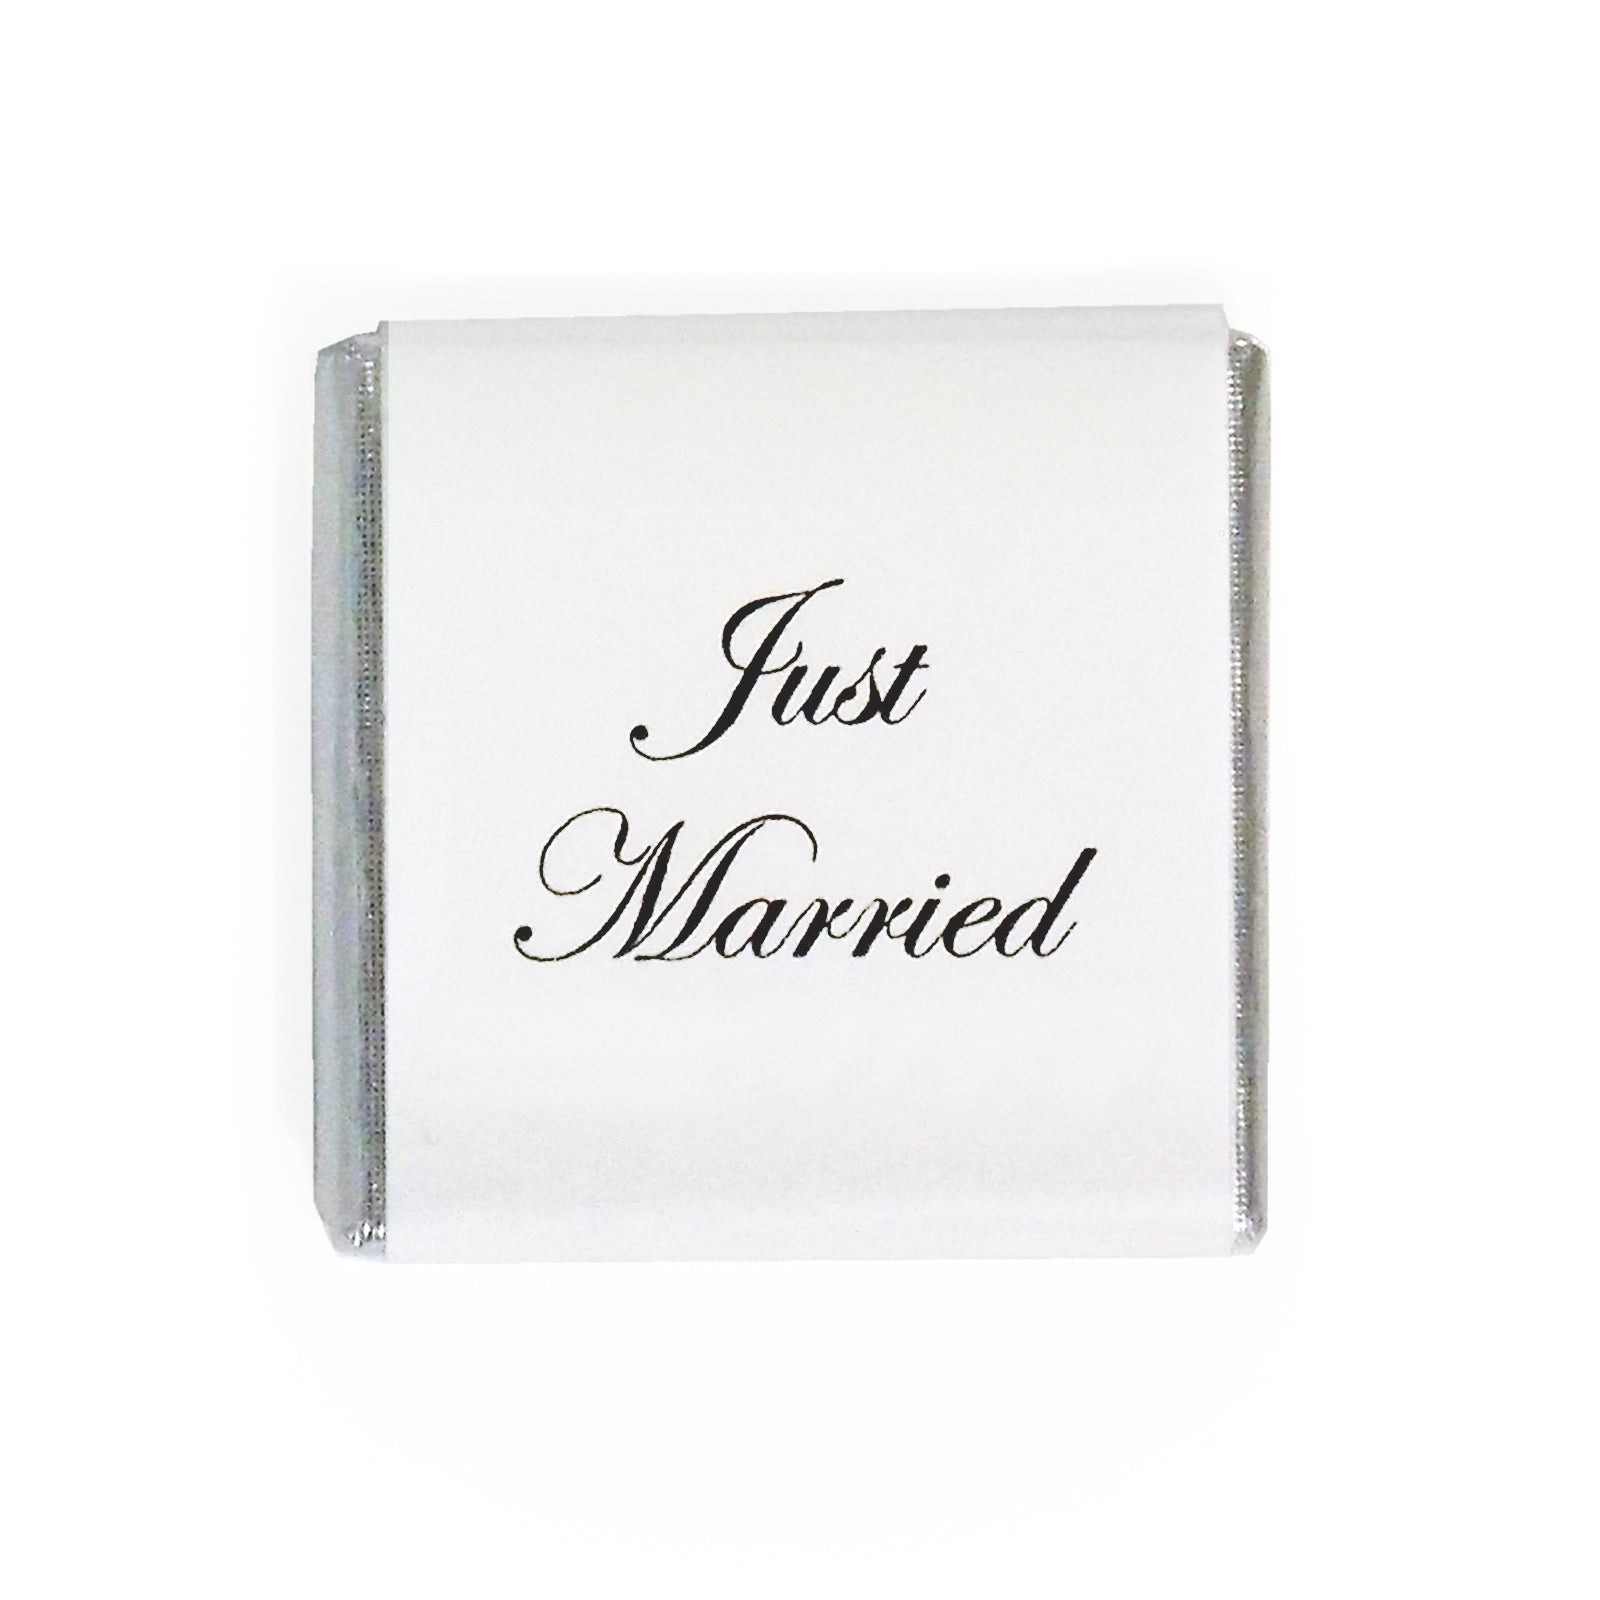 Just Married small wedding chocolate - white silver uk